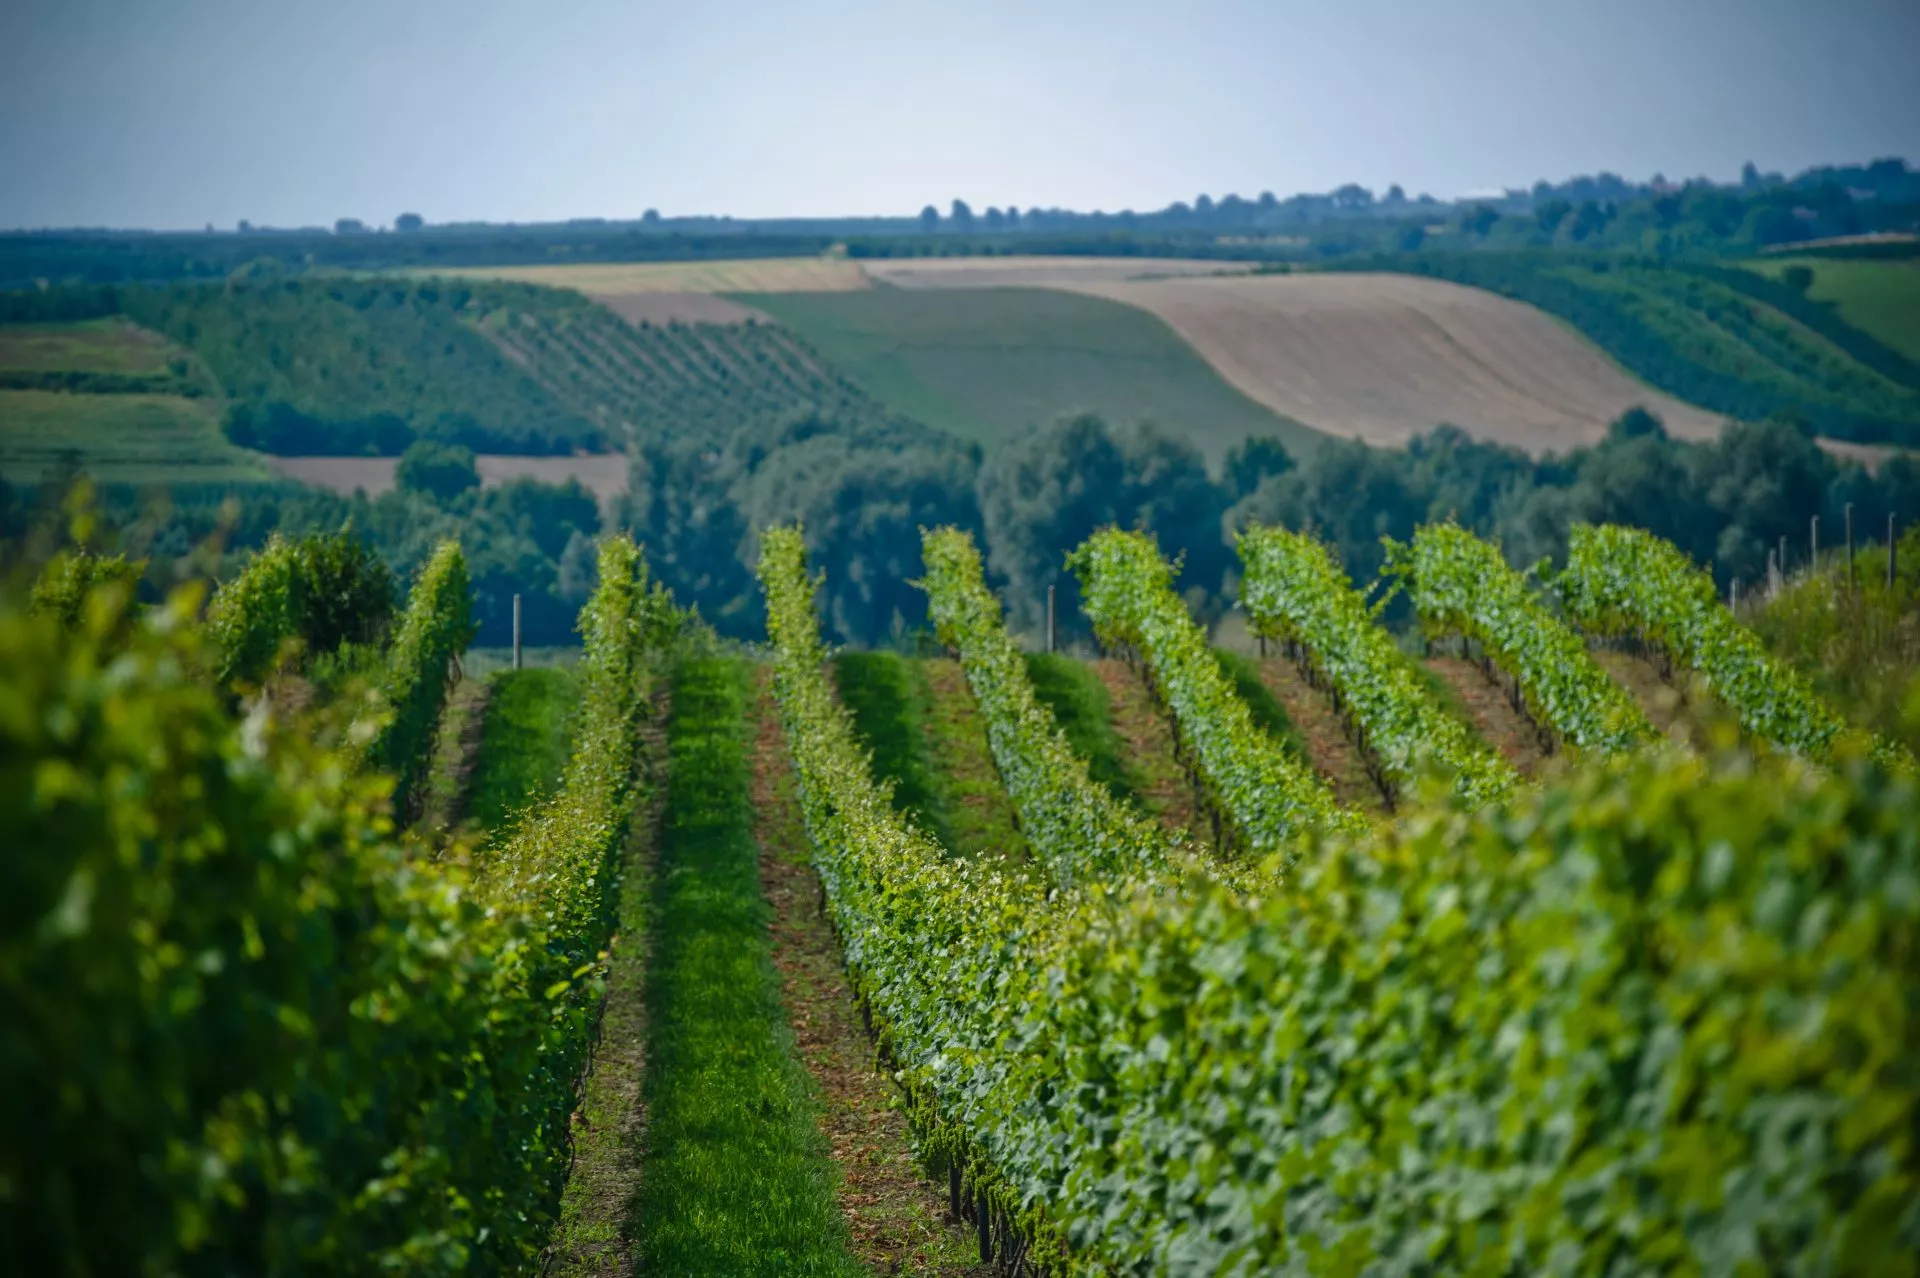 Plochocki Winery in Poland, Europe | Wineries - Rated 0.9